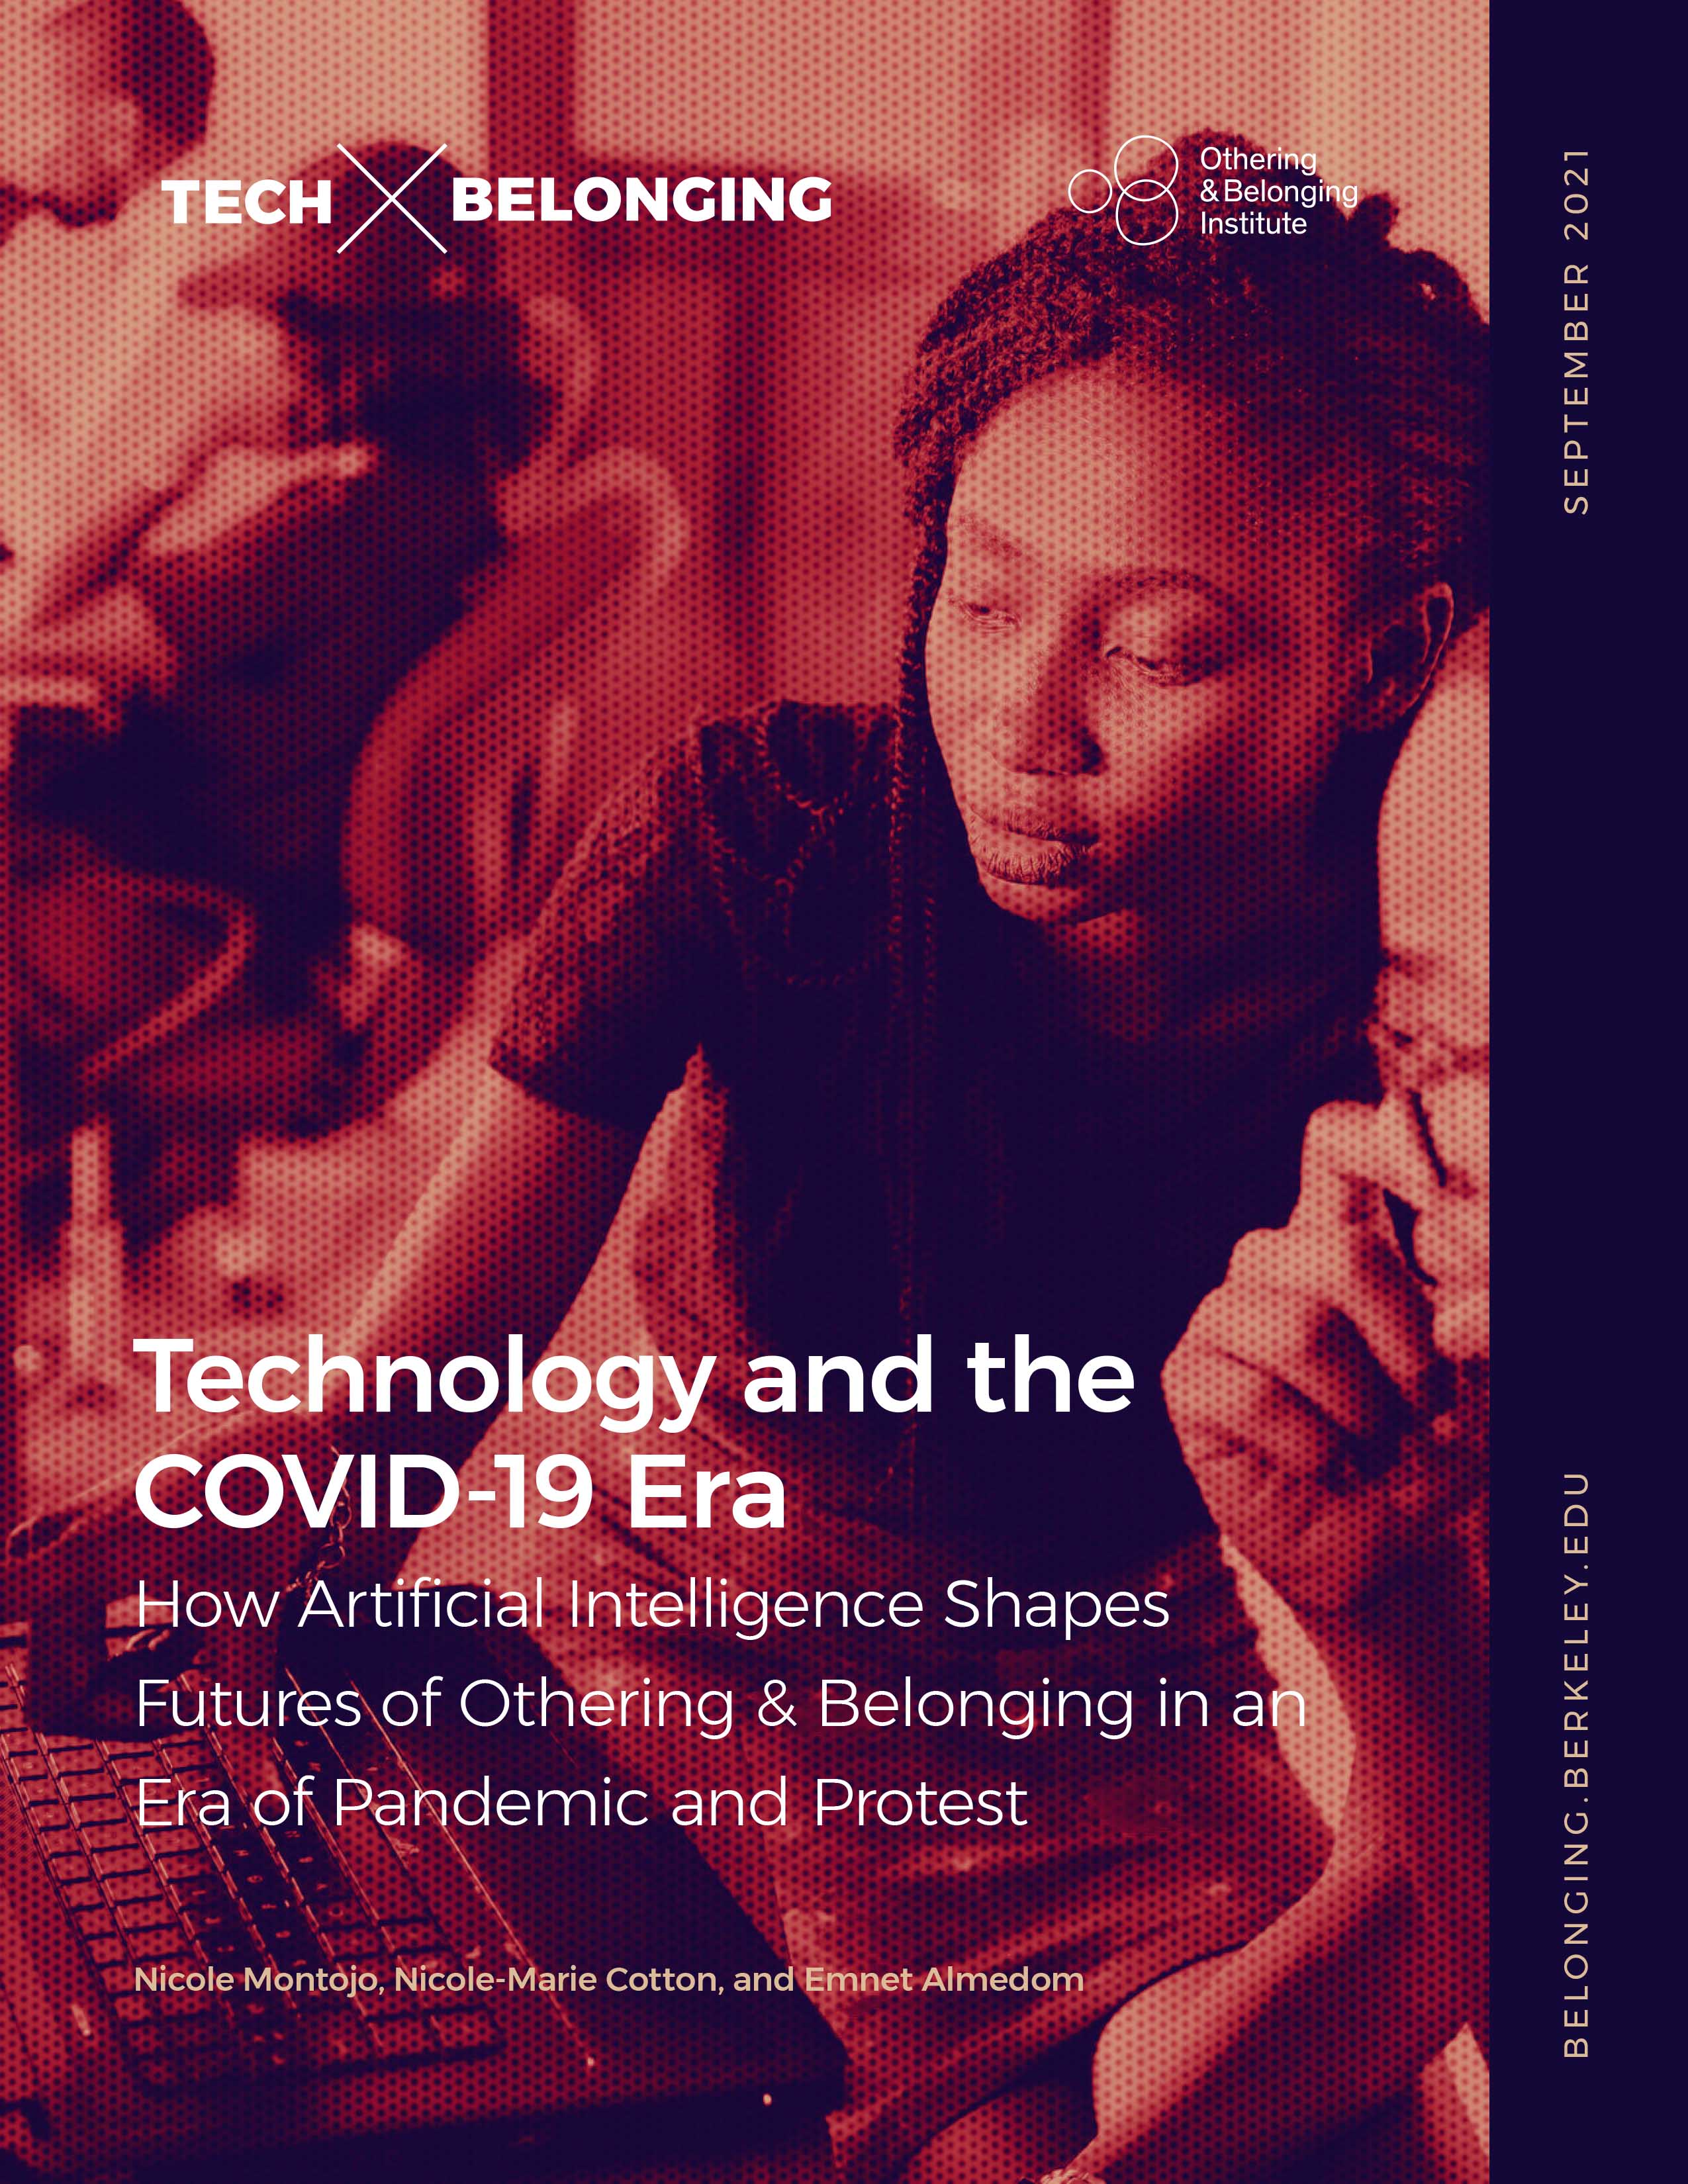 cover of the report featuring a Black woman and her colleague working on a laptop